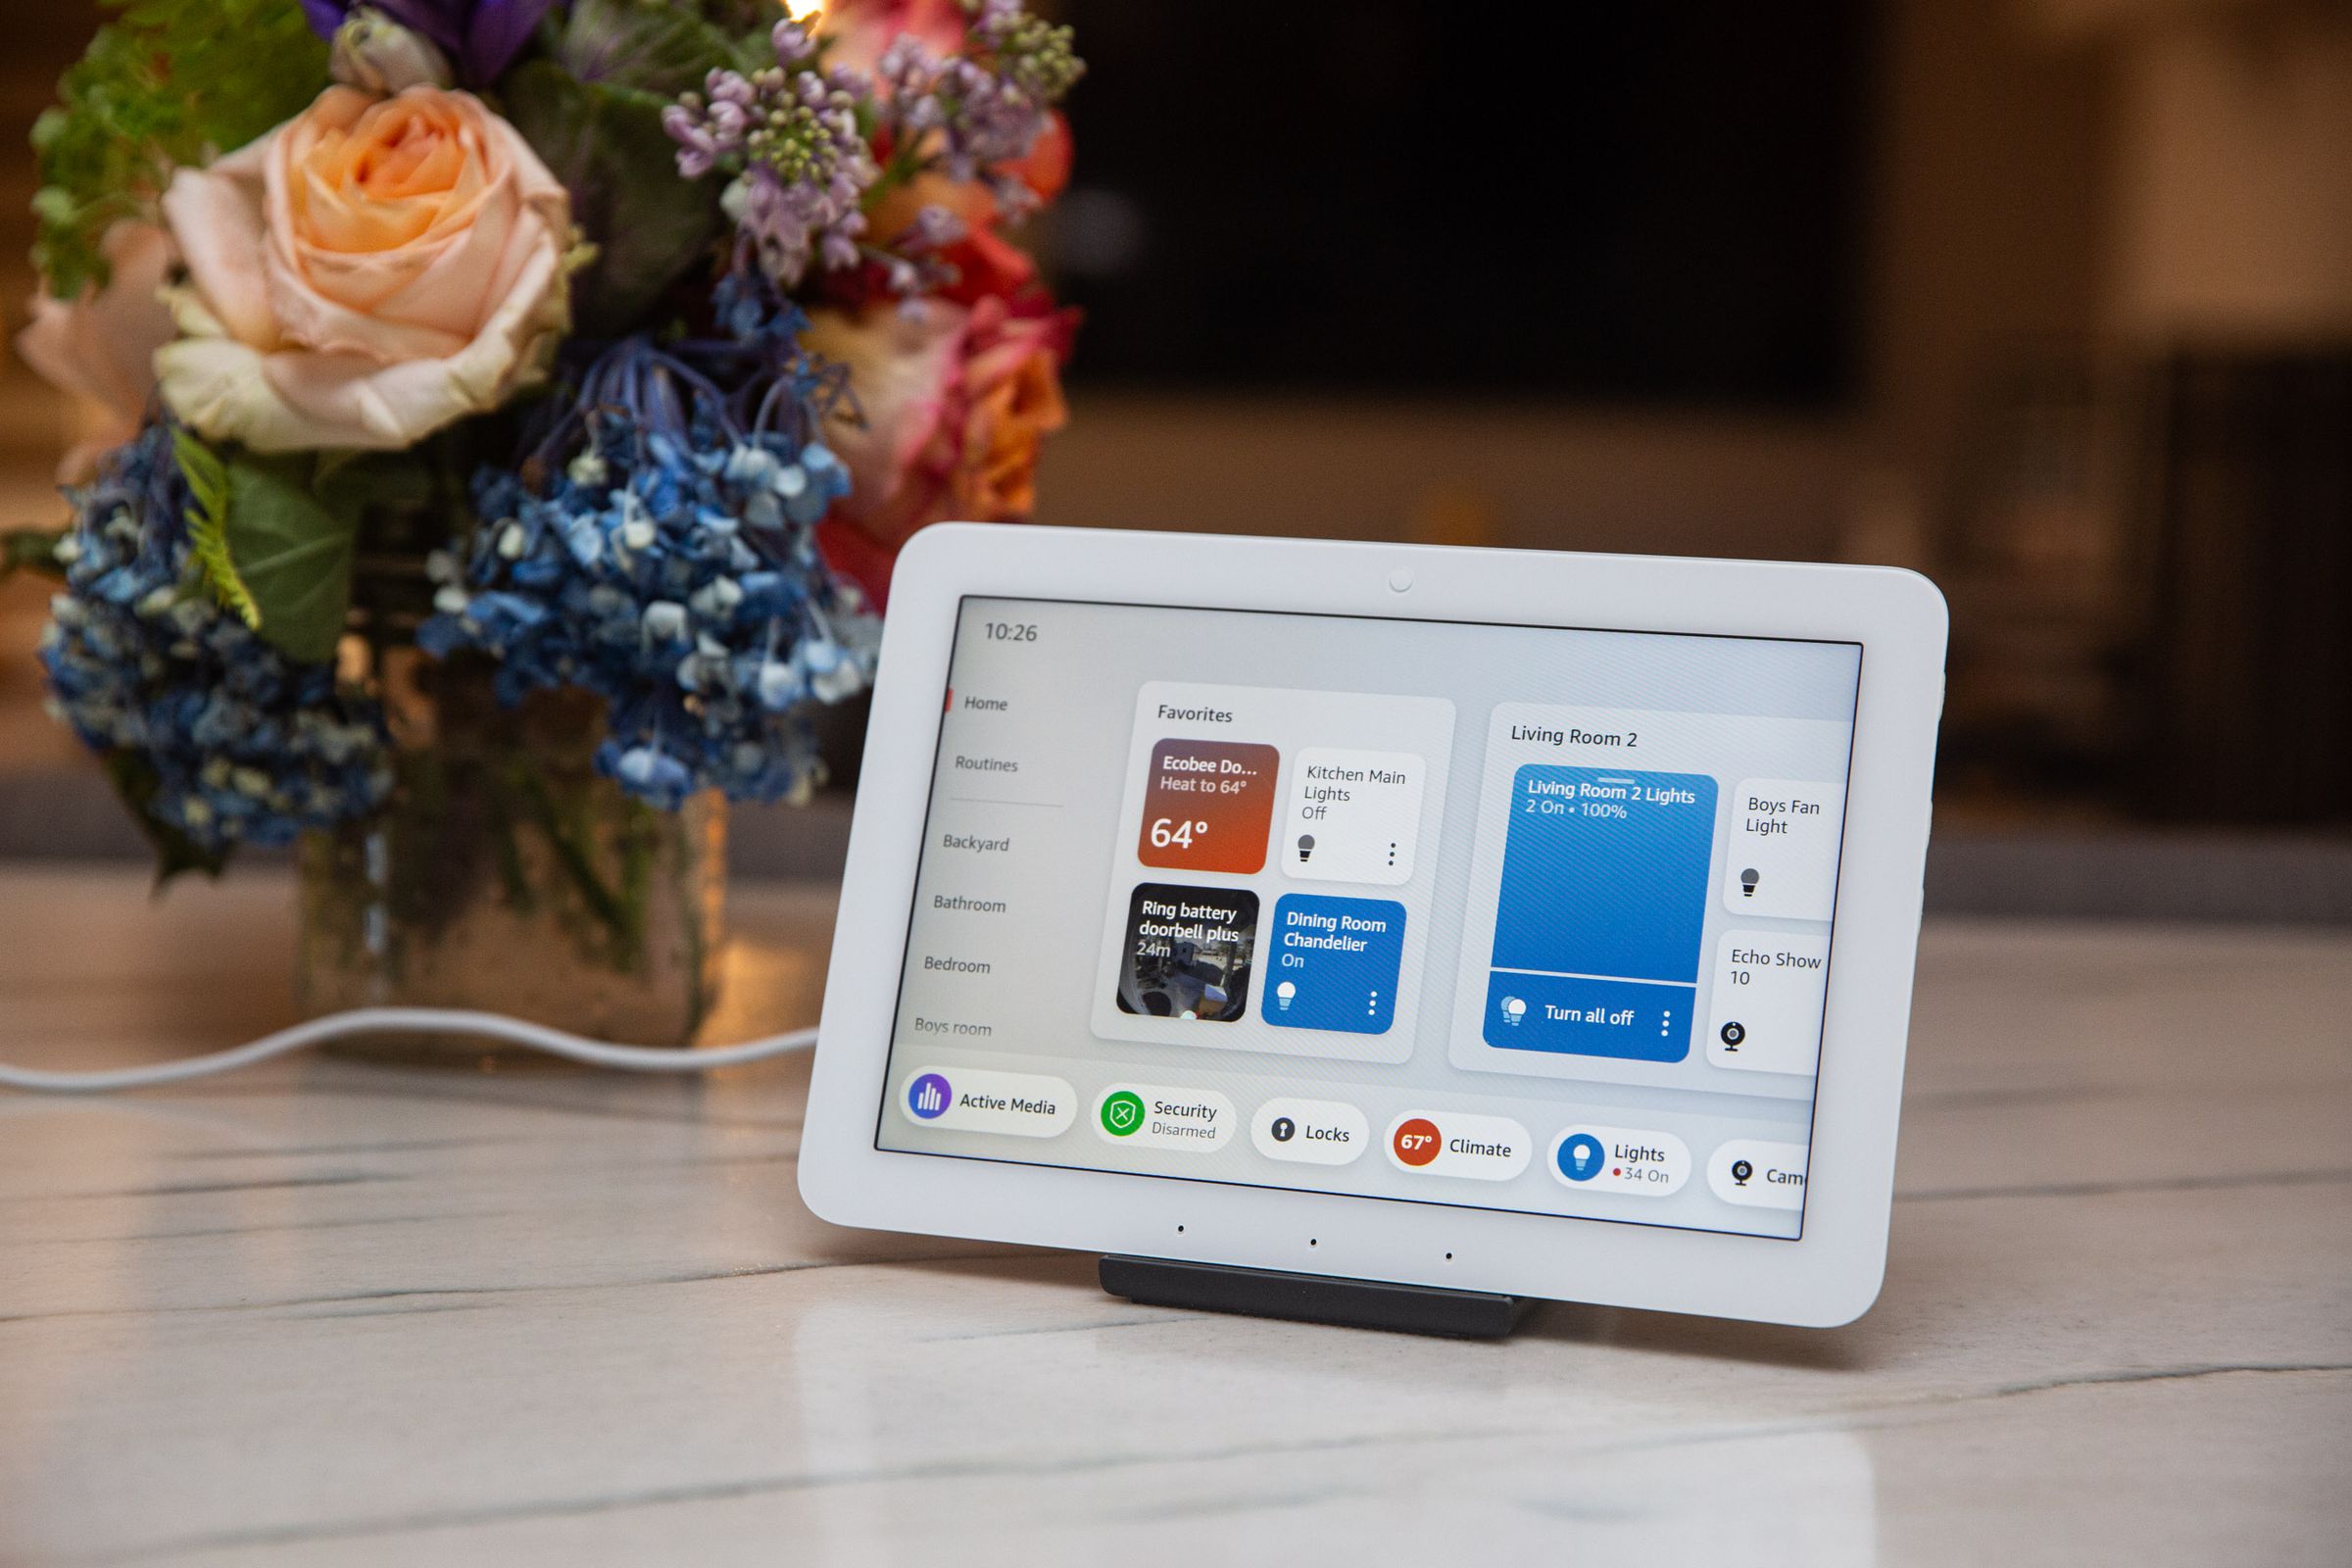 A small touchscreen tablet on a counter next to some flowers.